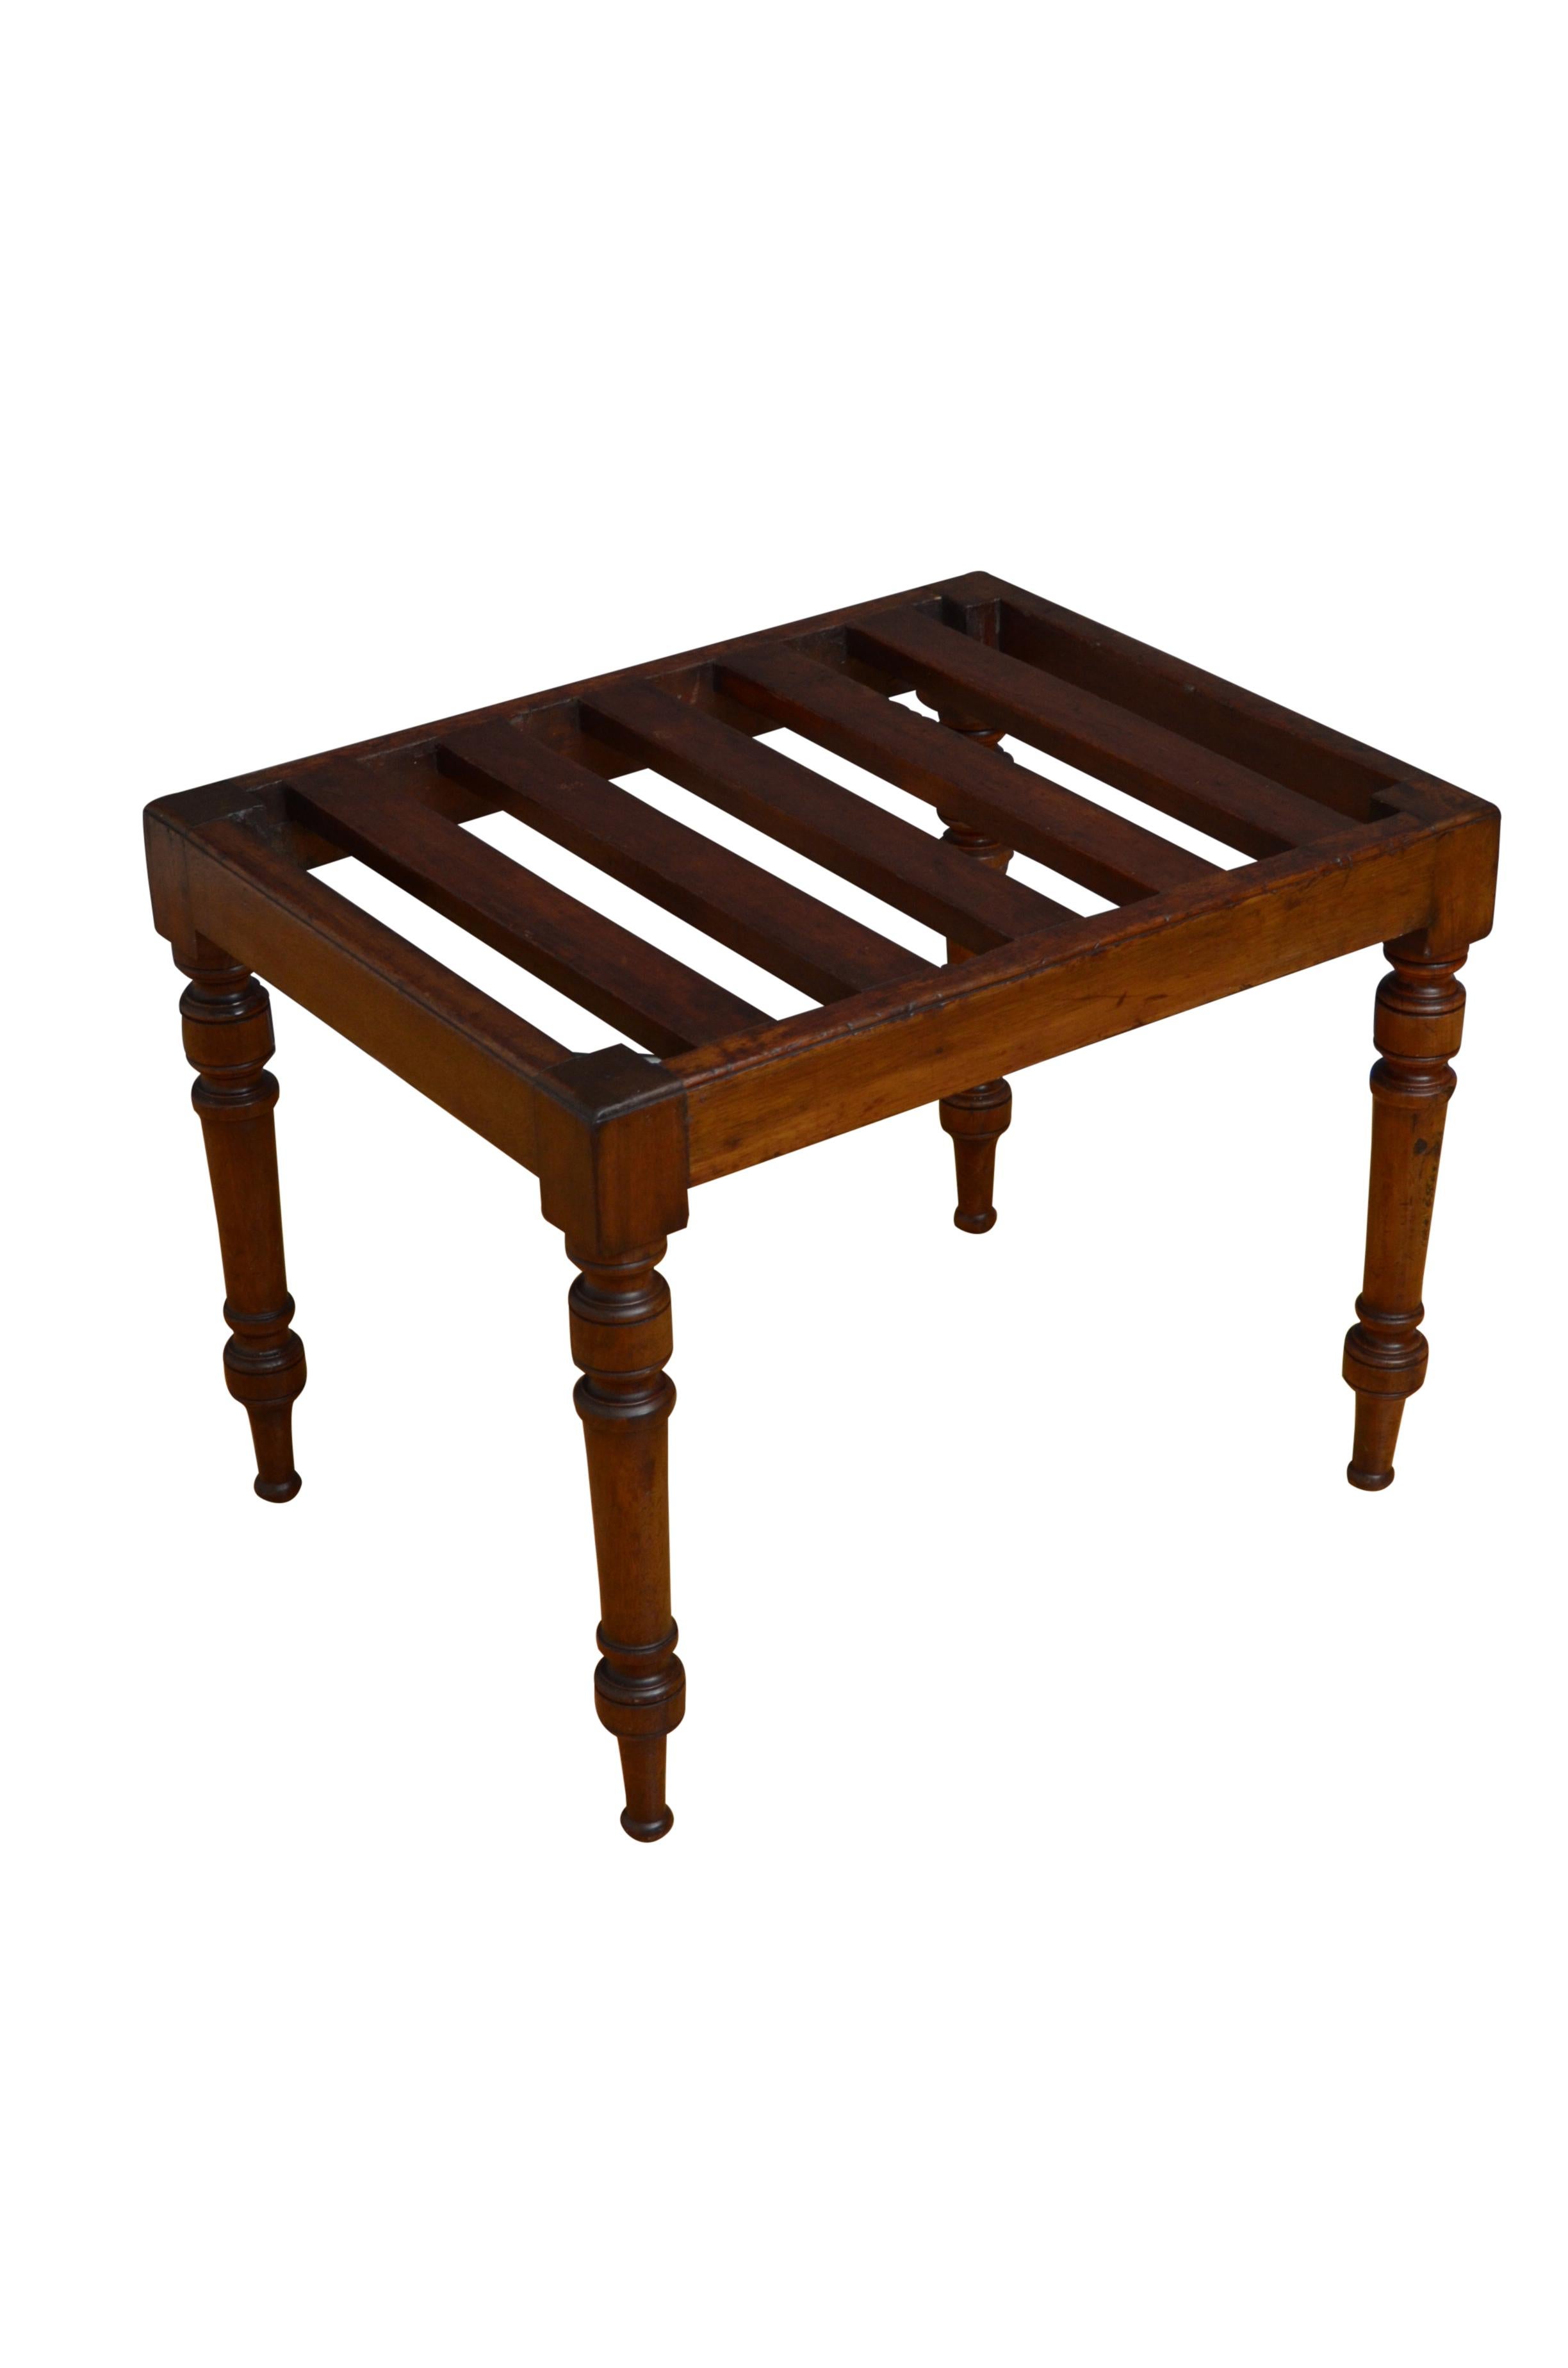 Victorian solid mahogany luggage rack with sturdy slats and turned legs. This antique luggage rack would make a good hall seat. All in home ready condition retaining original finish and good patina. c1860
H18